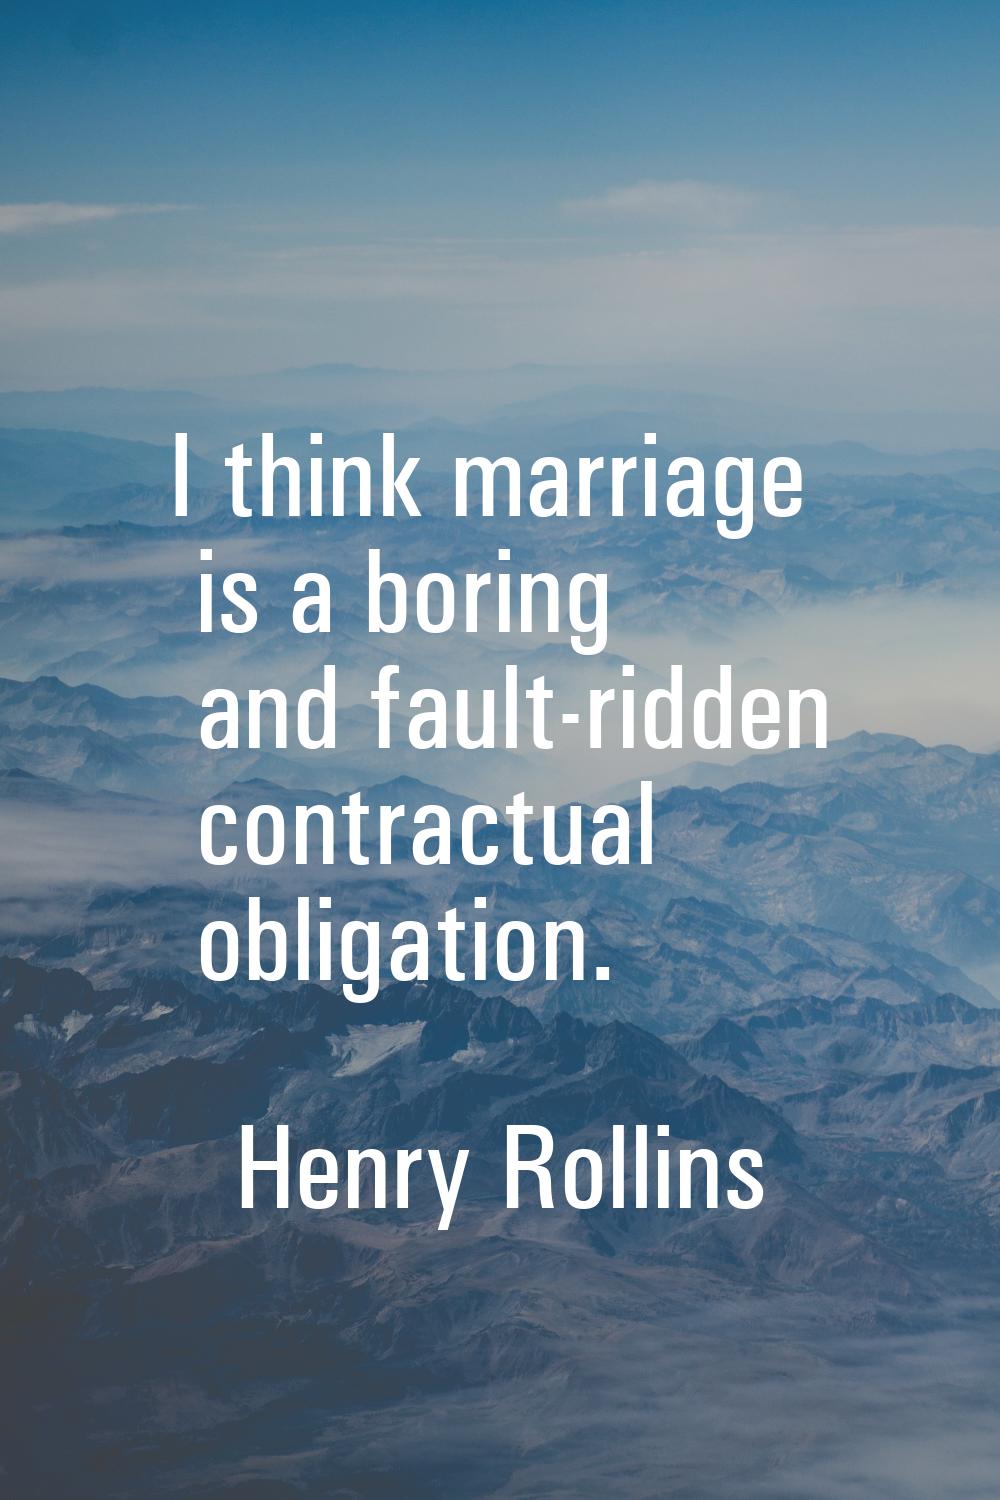 I think marriage is a boring and fault-ridden contractual obligation.